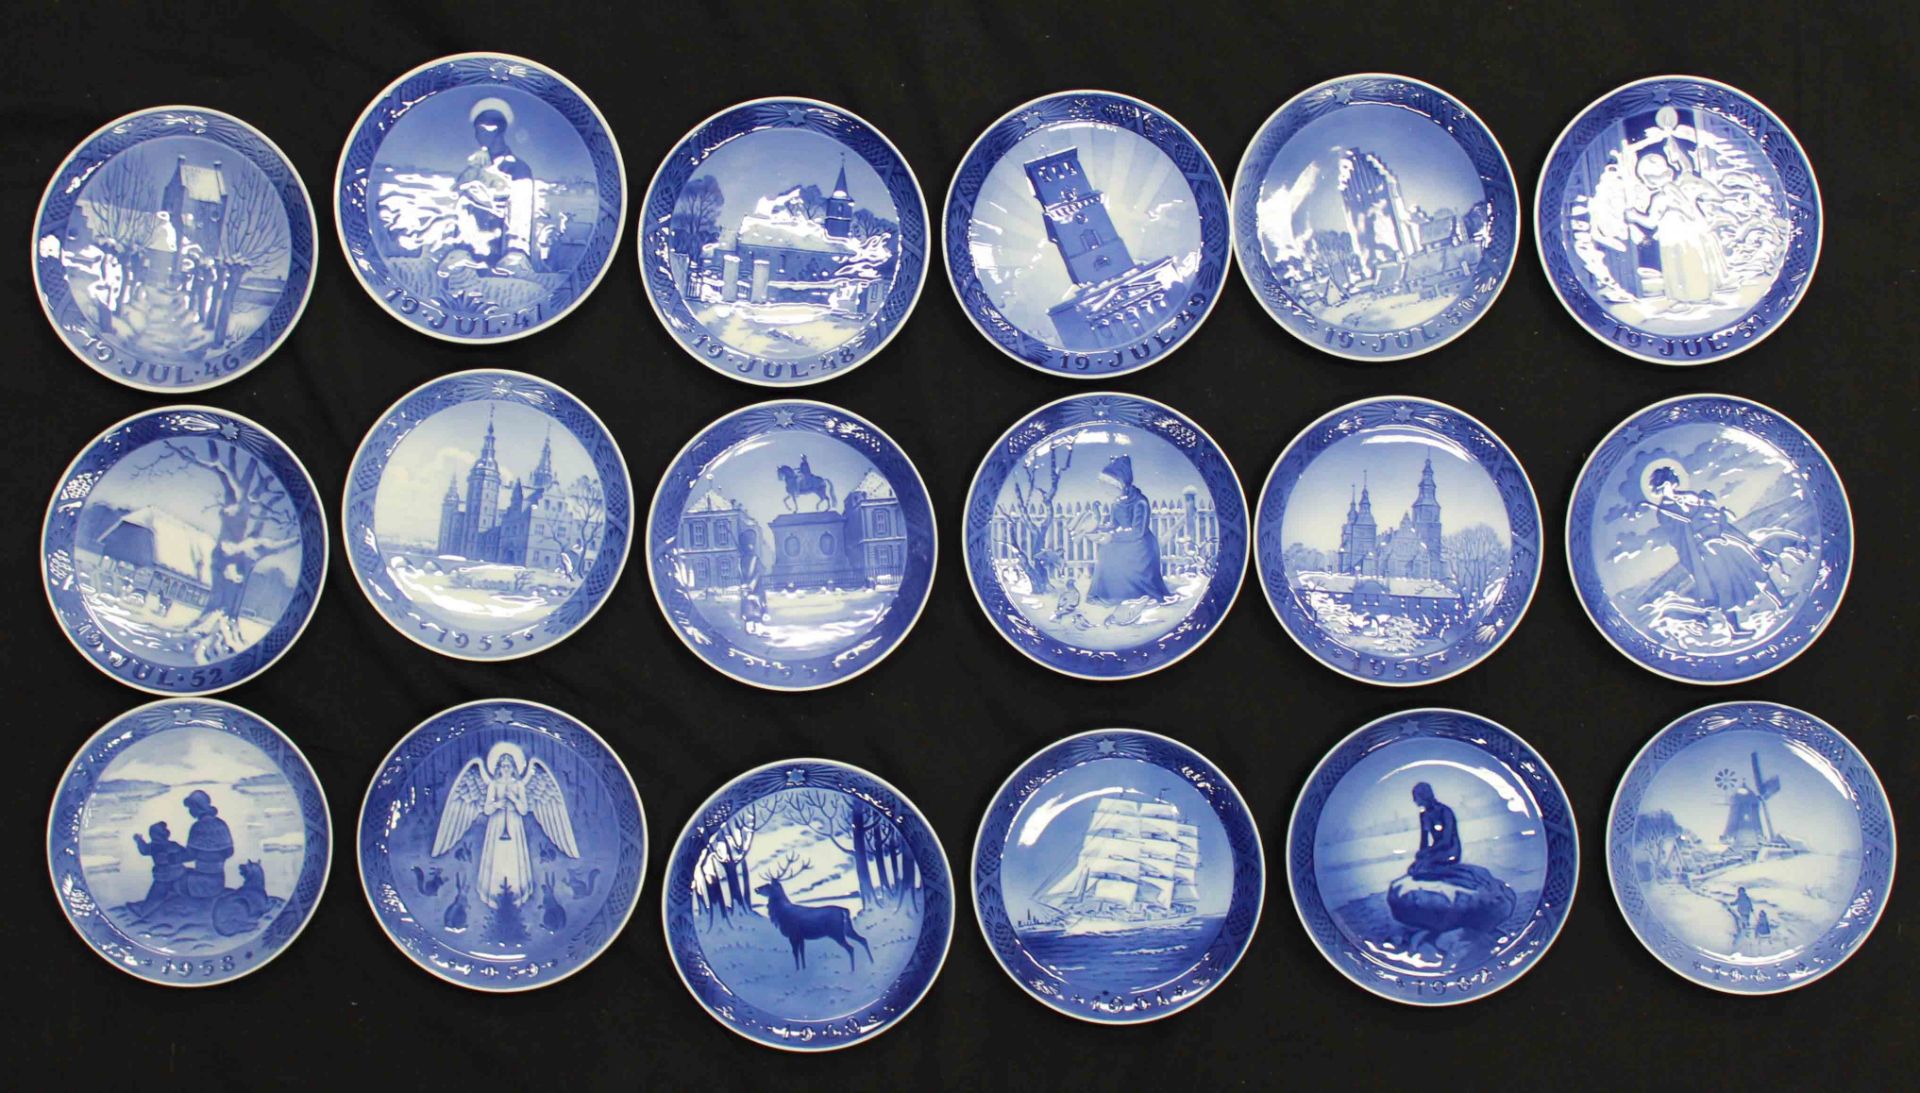 94 Christmas plates - Royal Copenhagen. Complete series from 1910-2004. - Image 27 of 28